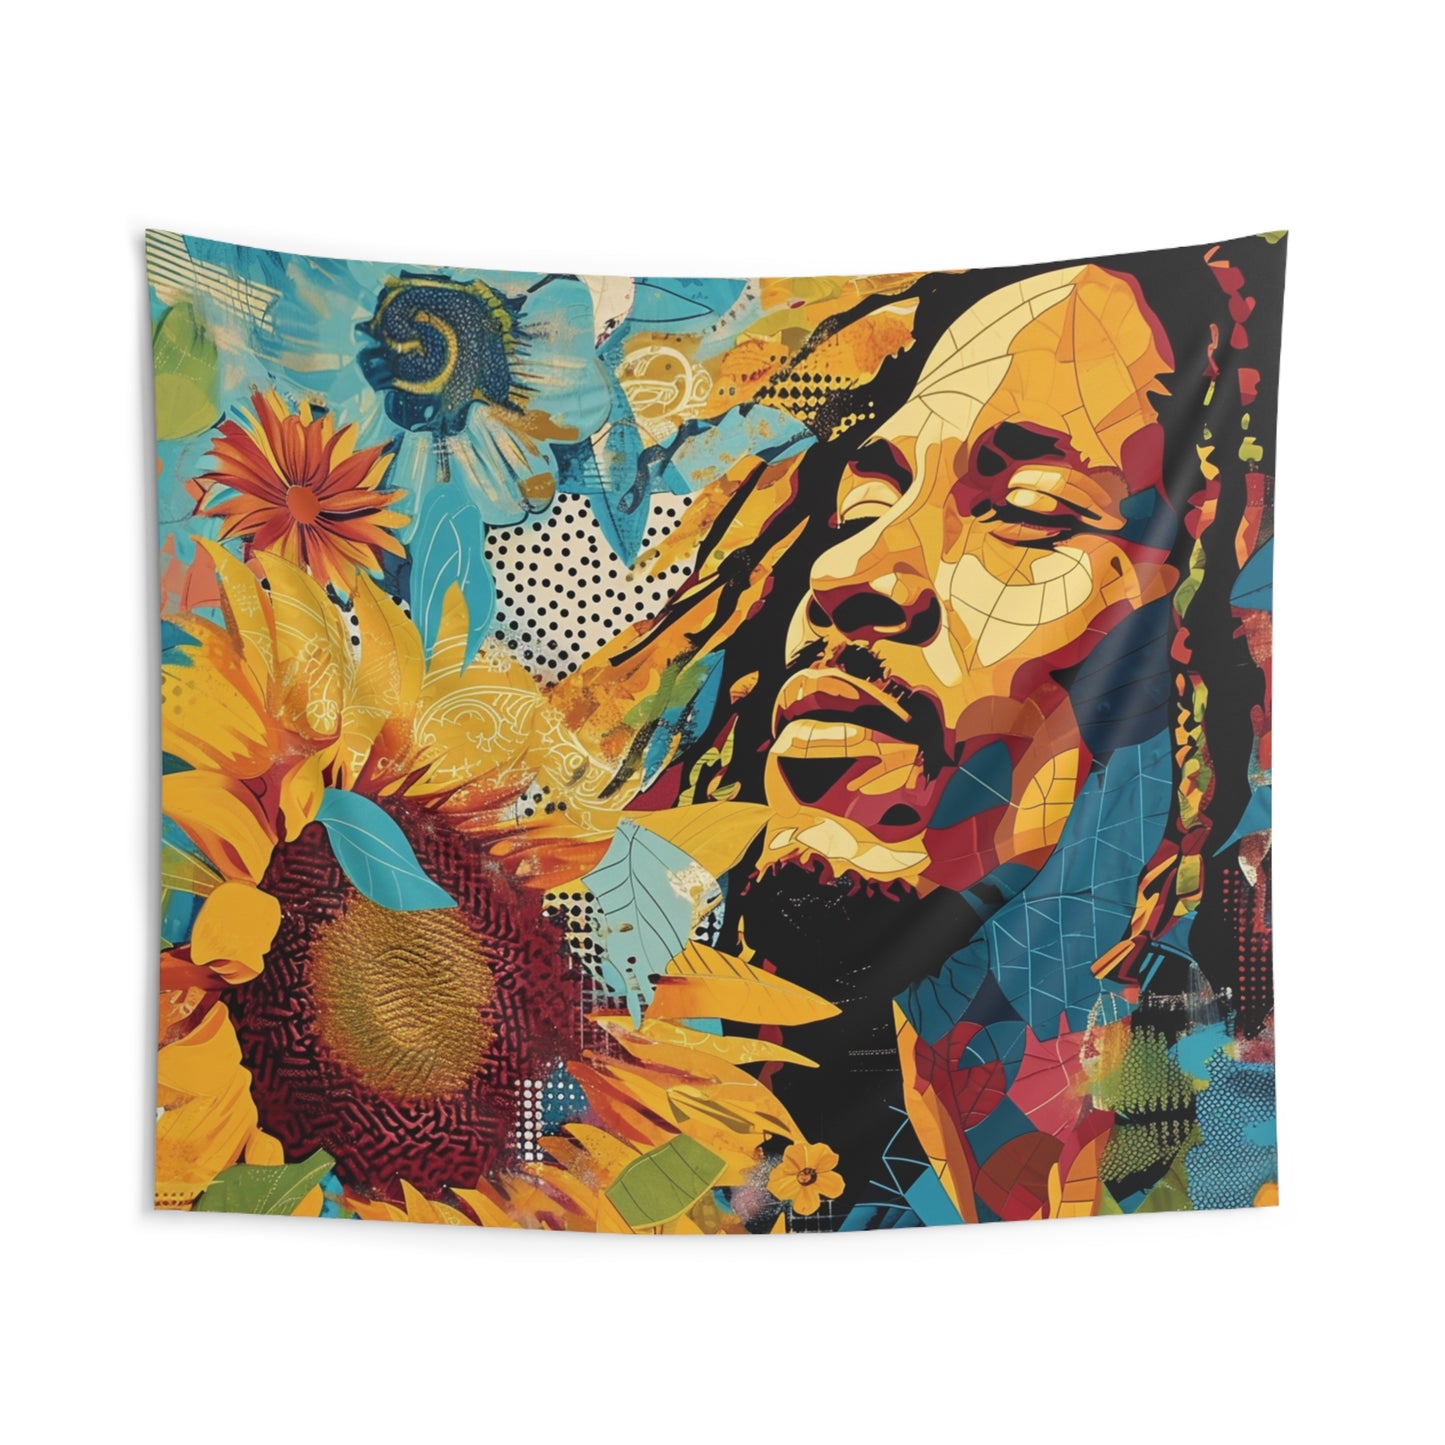 Bob Marley Portrait Collage Tapestry